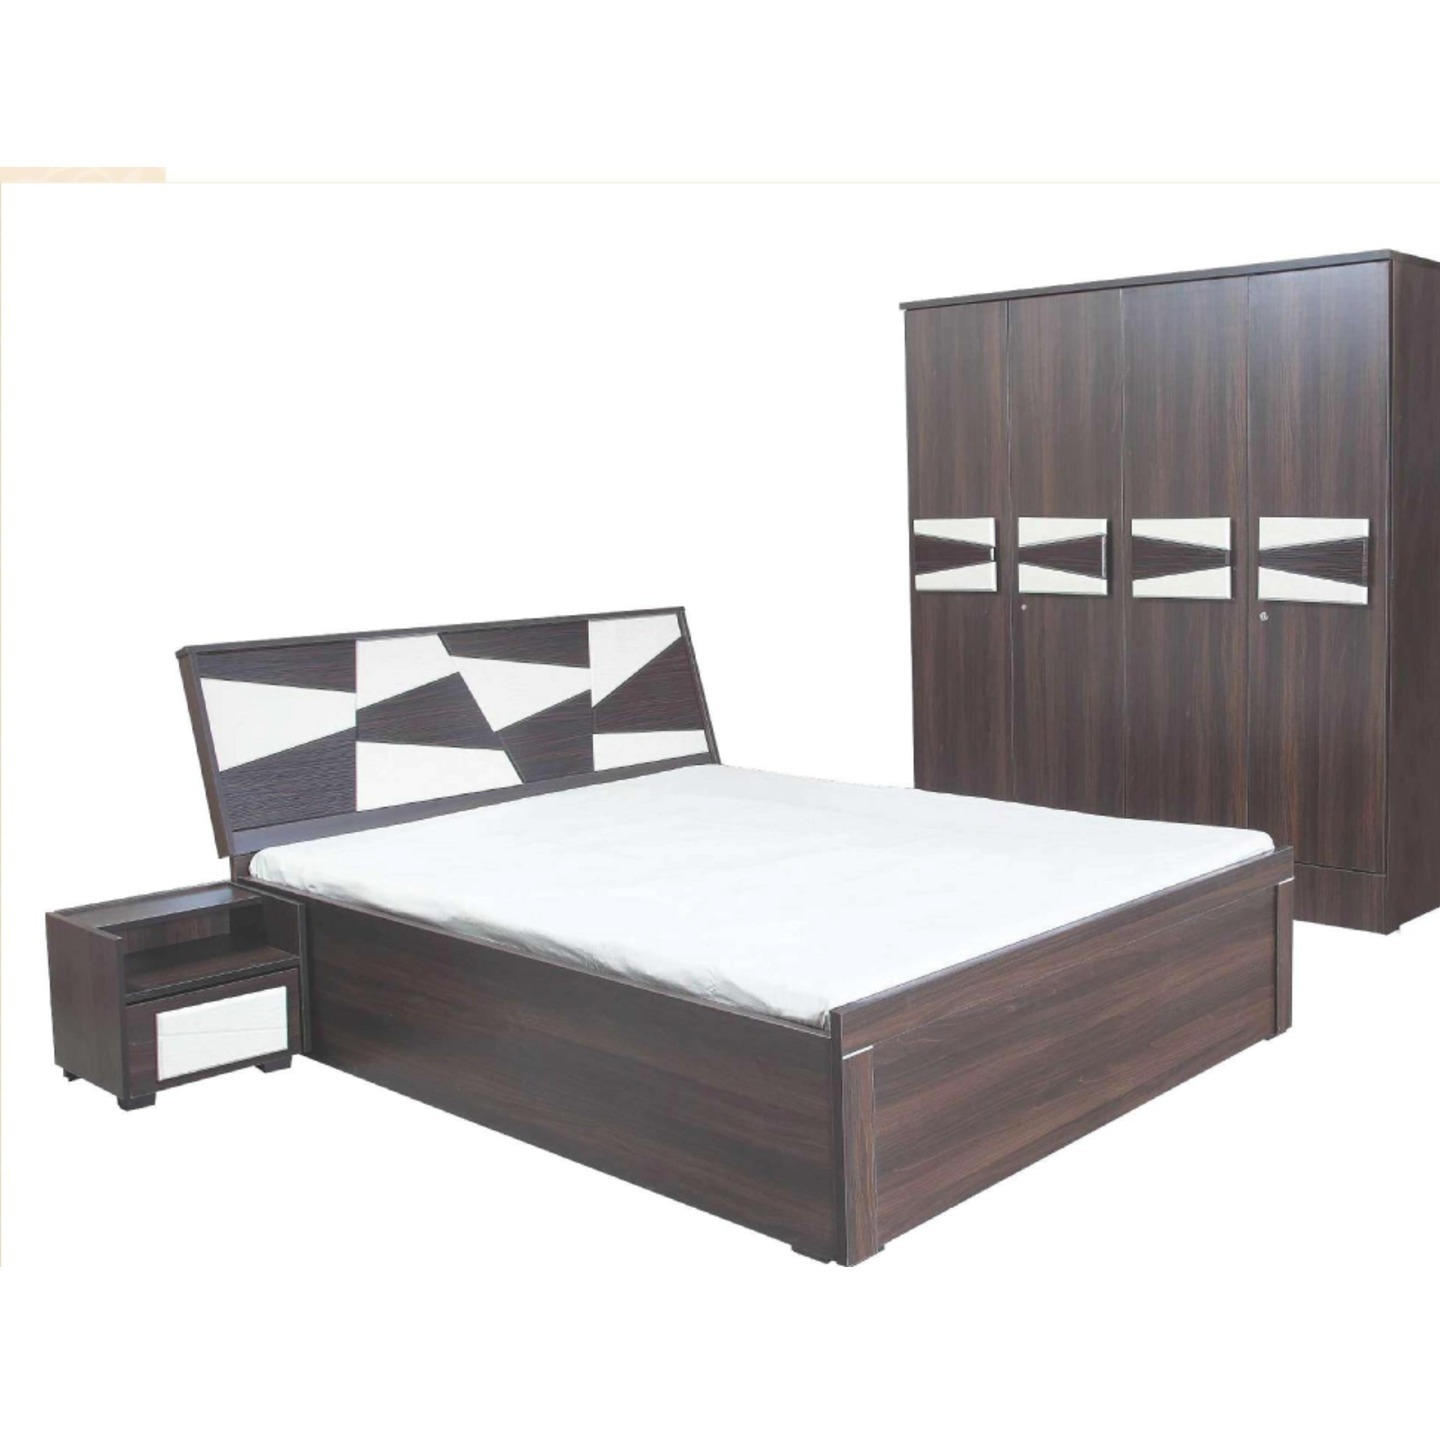 RD Queen Size Bed With Box Bed 78x 60 Tulip